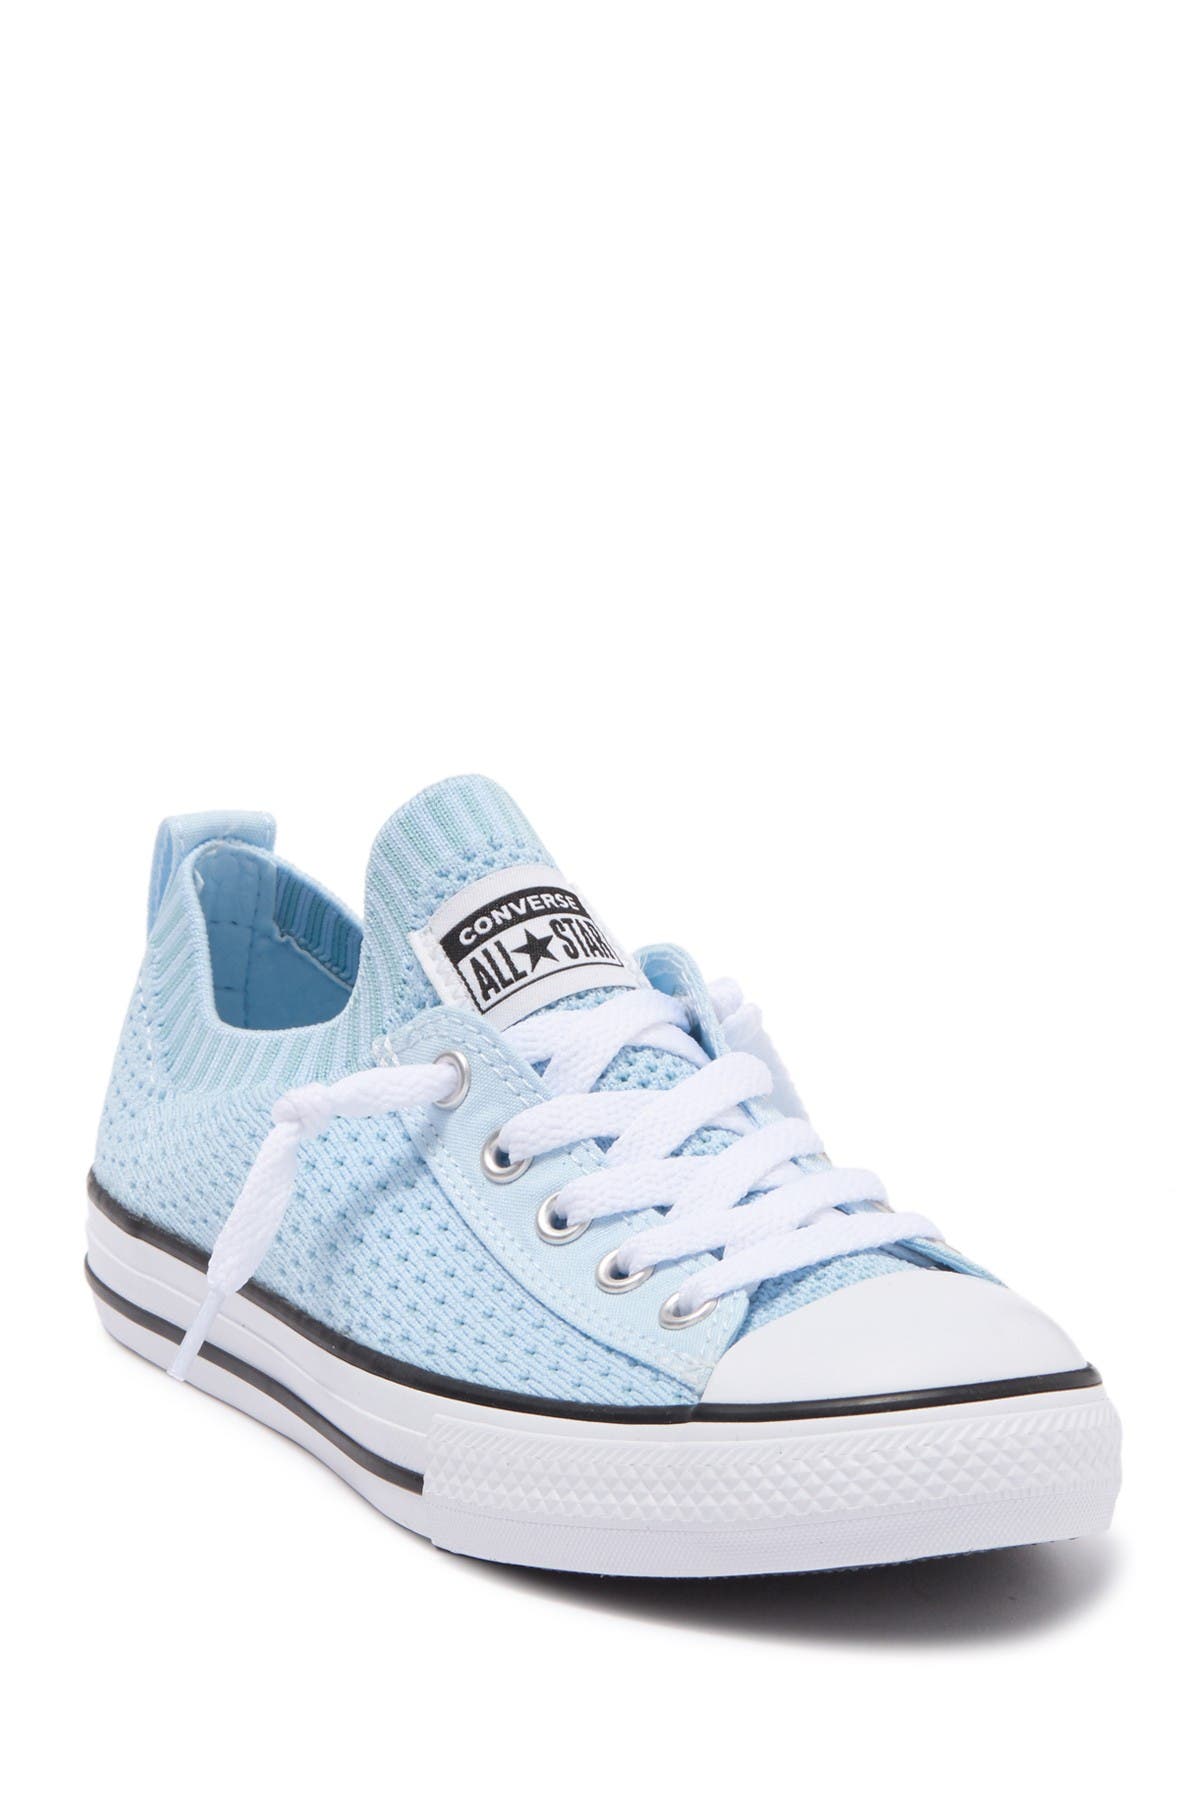 perforated converse